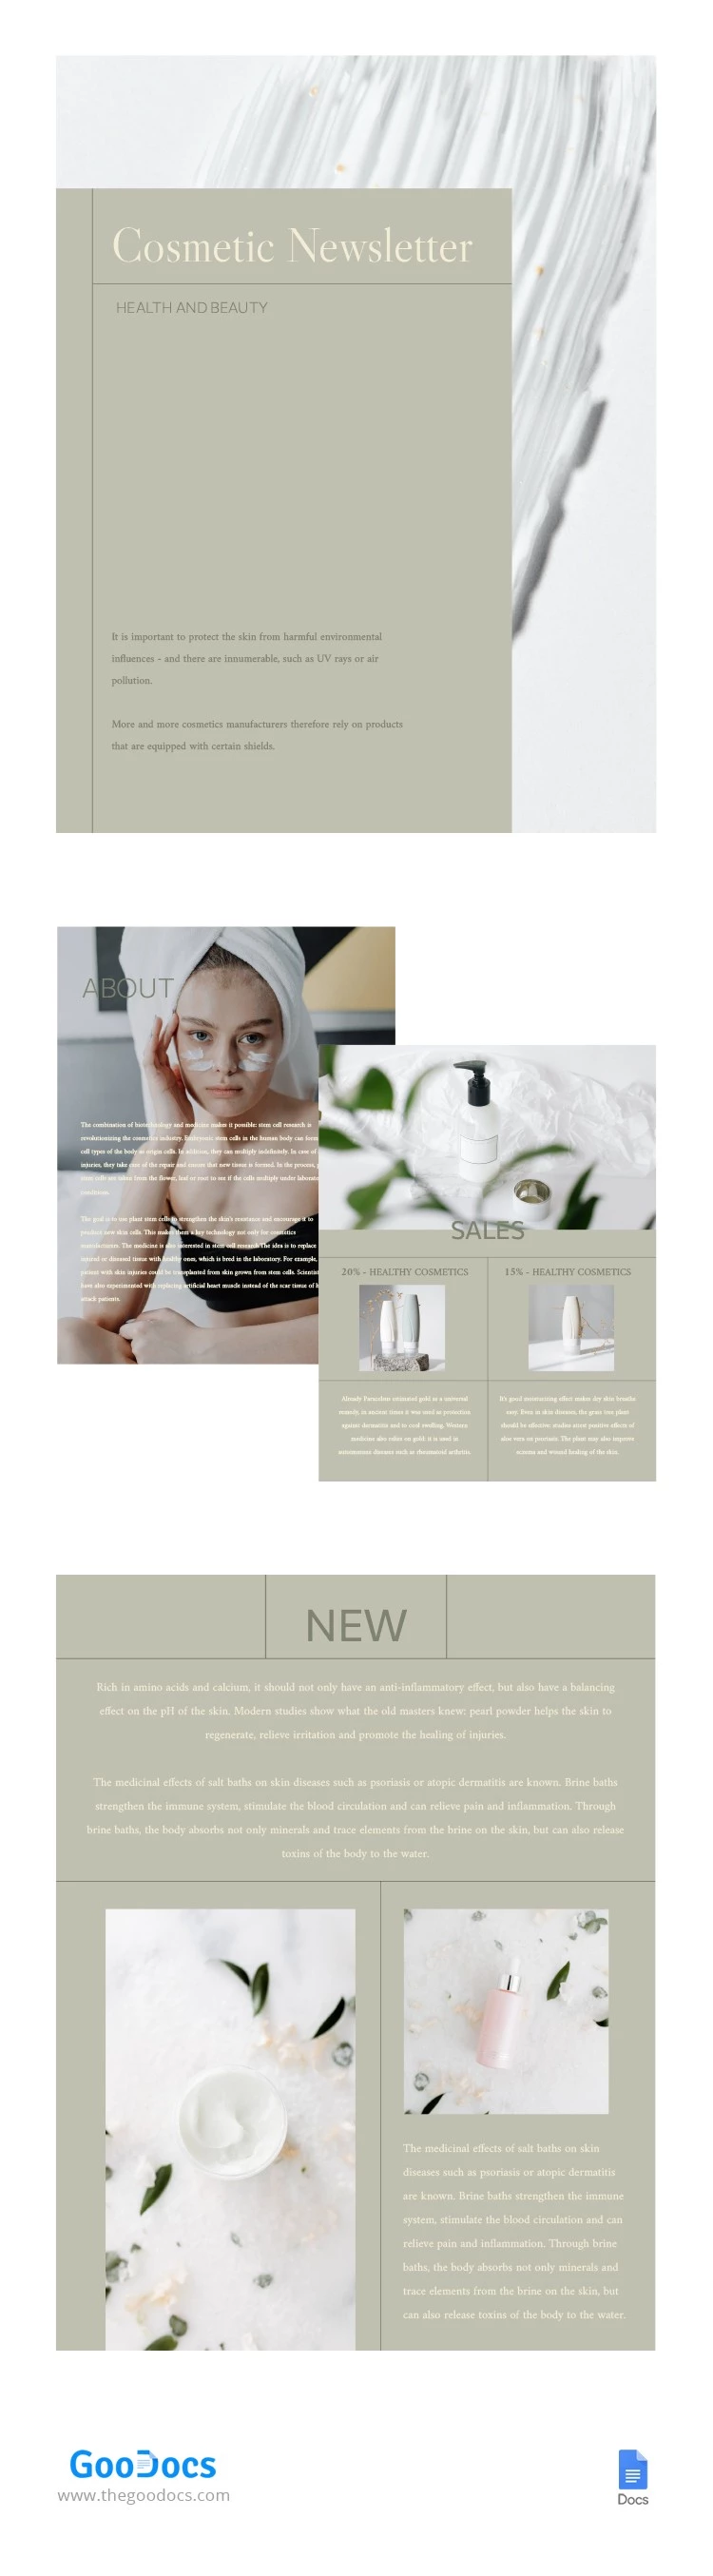 Olive Cosmetic Newsletter - free Google Docs Template - 10063022